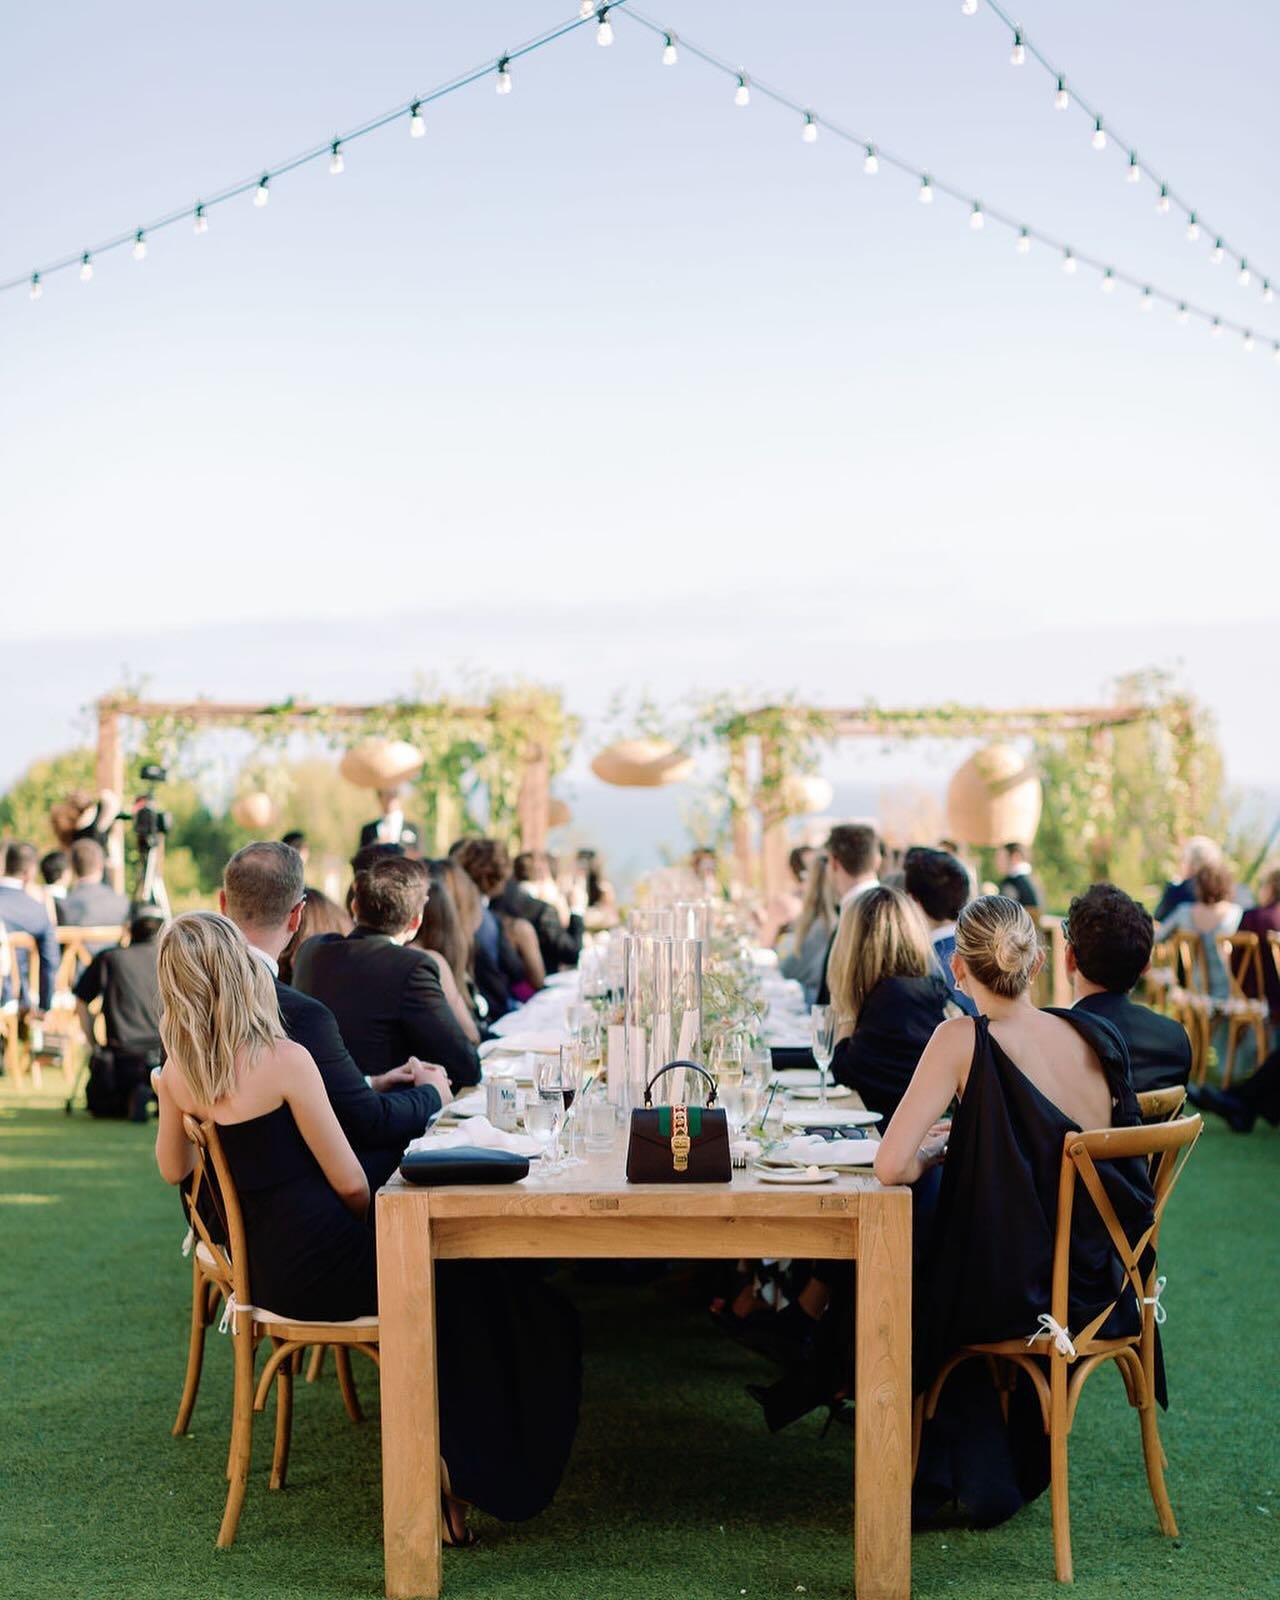 Our guests not only bring style to the celebration but also a keen sense of fashion-forward listening during the heartfelt speeches.

Venue: @terranearesort 
Planning: @ilanarubinevents
Photography: @anyakernes
Videography: @encorstudio
Hair: @_lovel